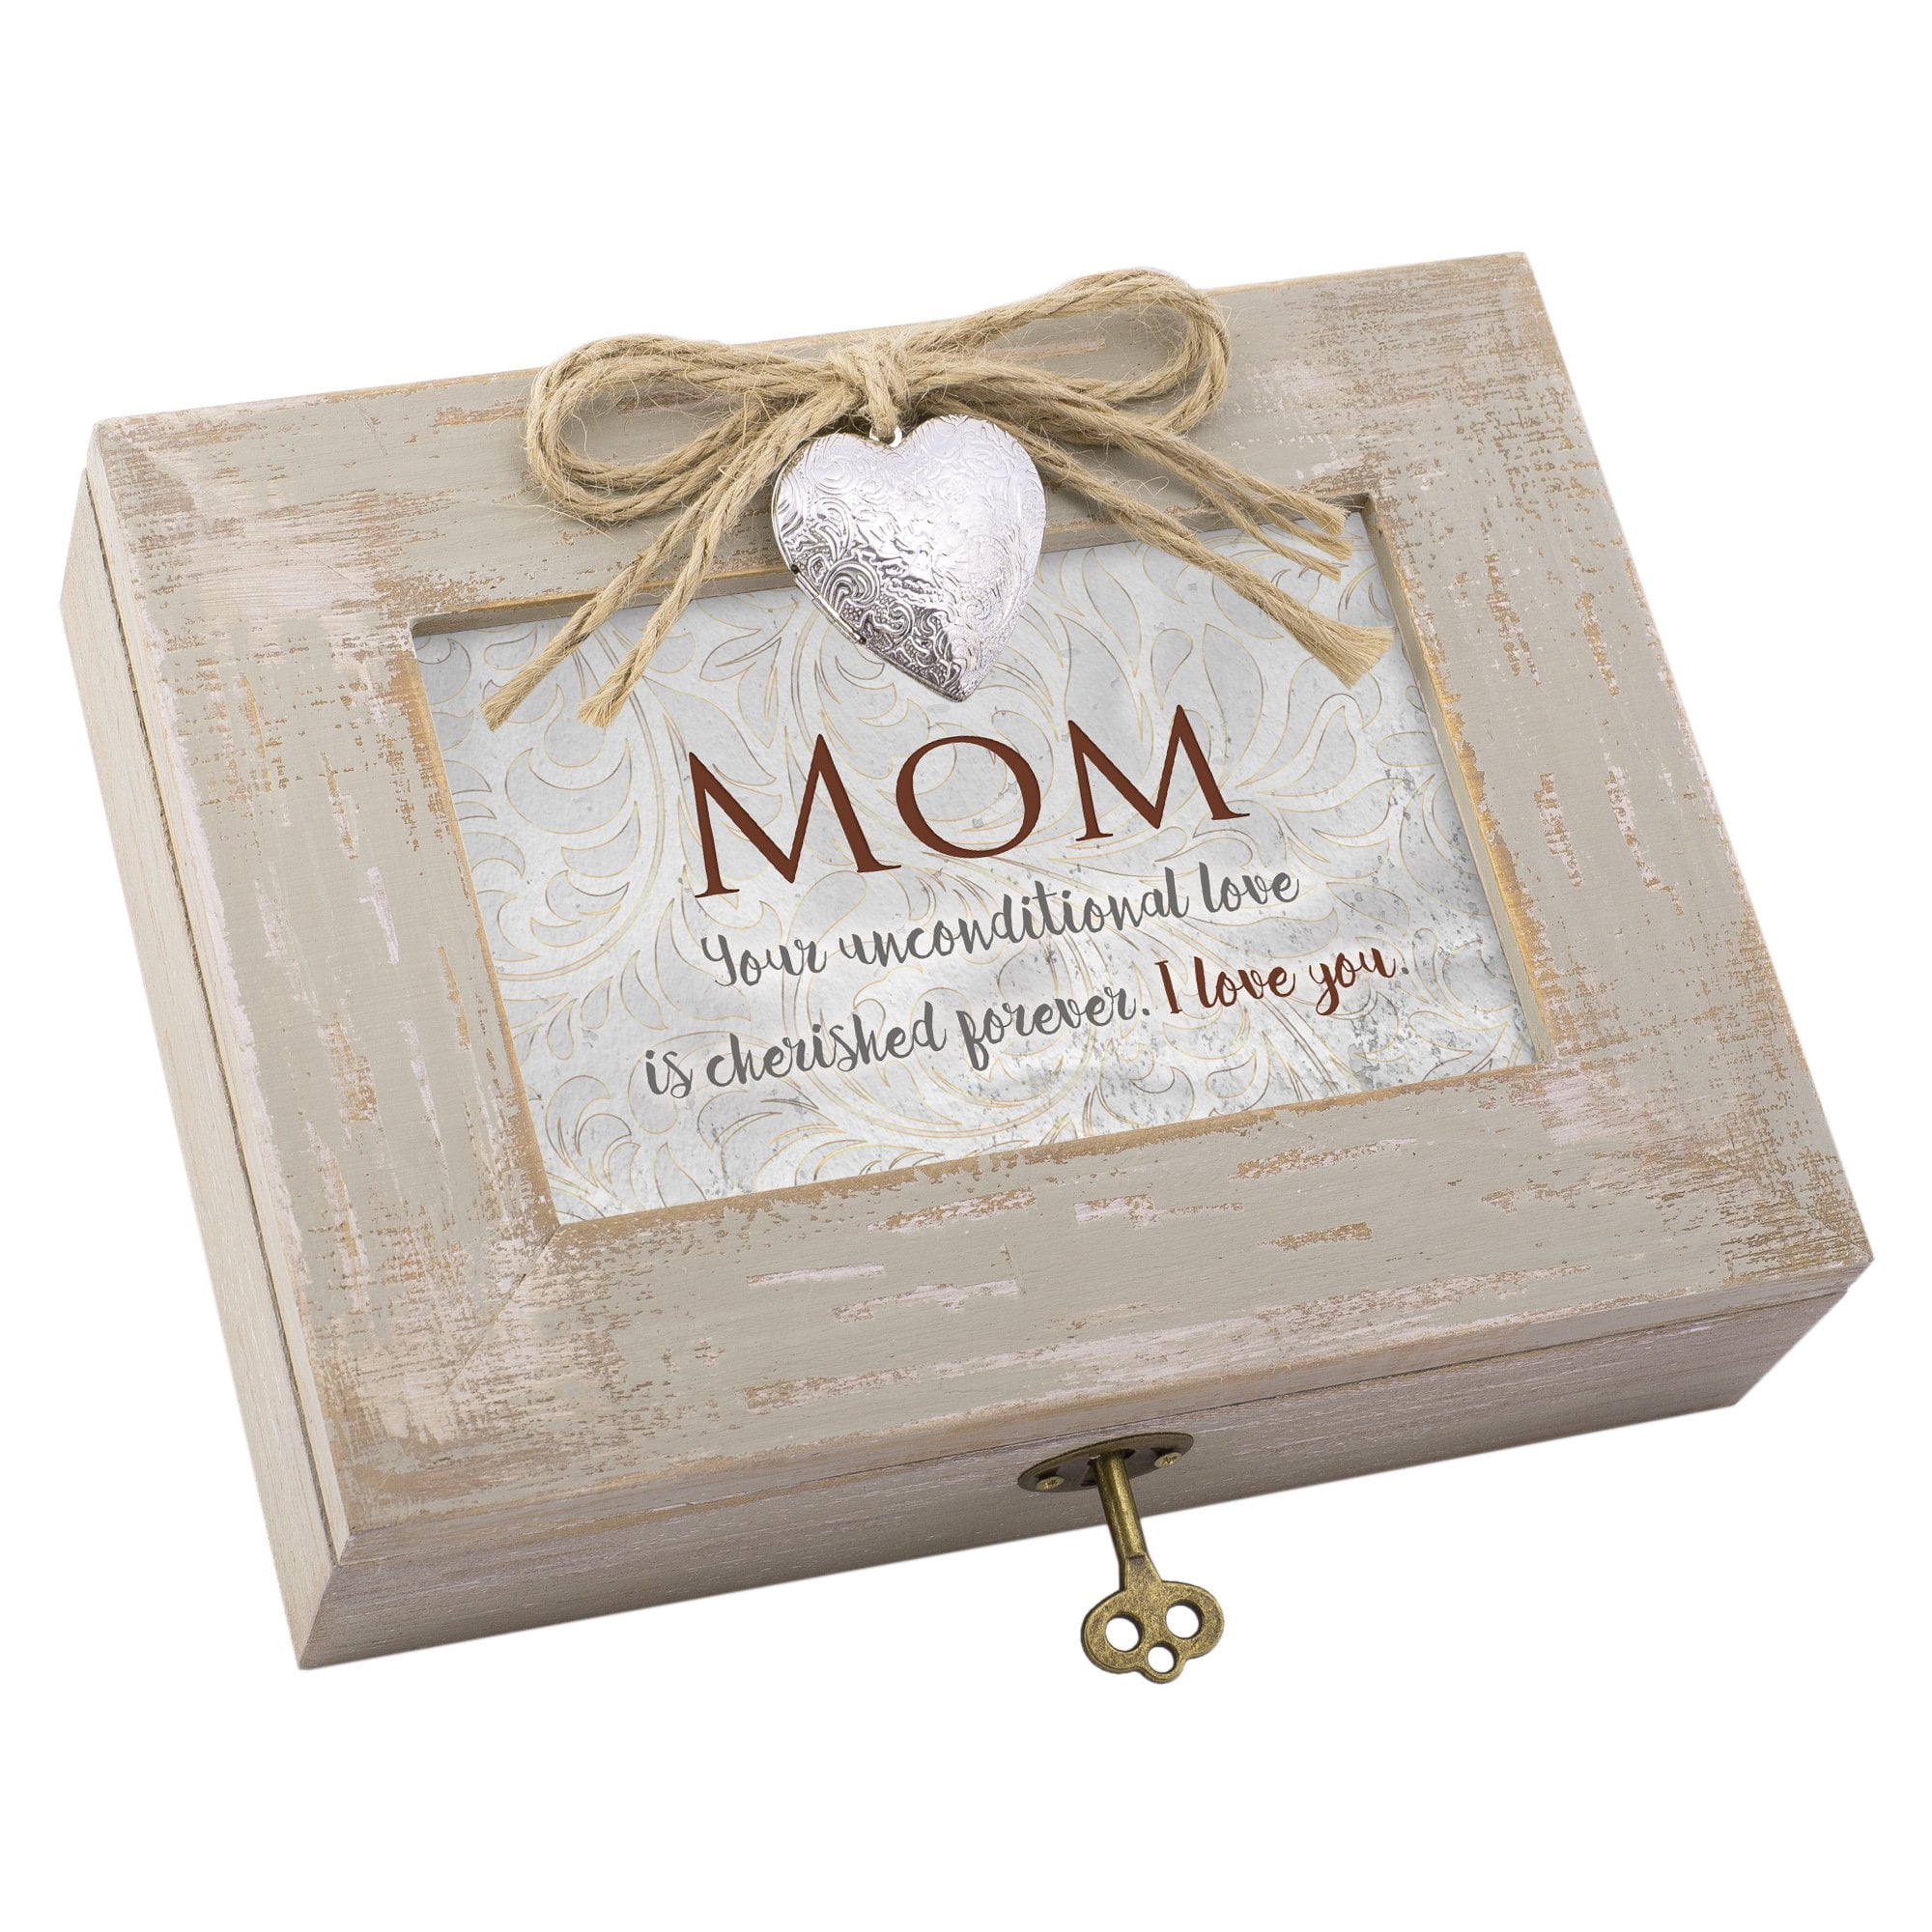 Cottage Garden Mom Your Unconditional Love Natural Taupe Jewelry